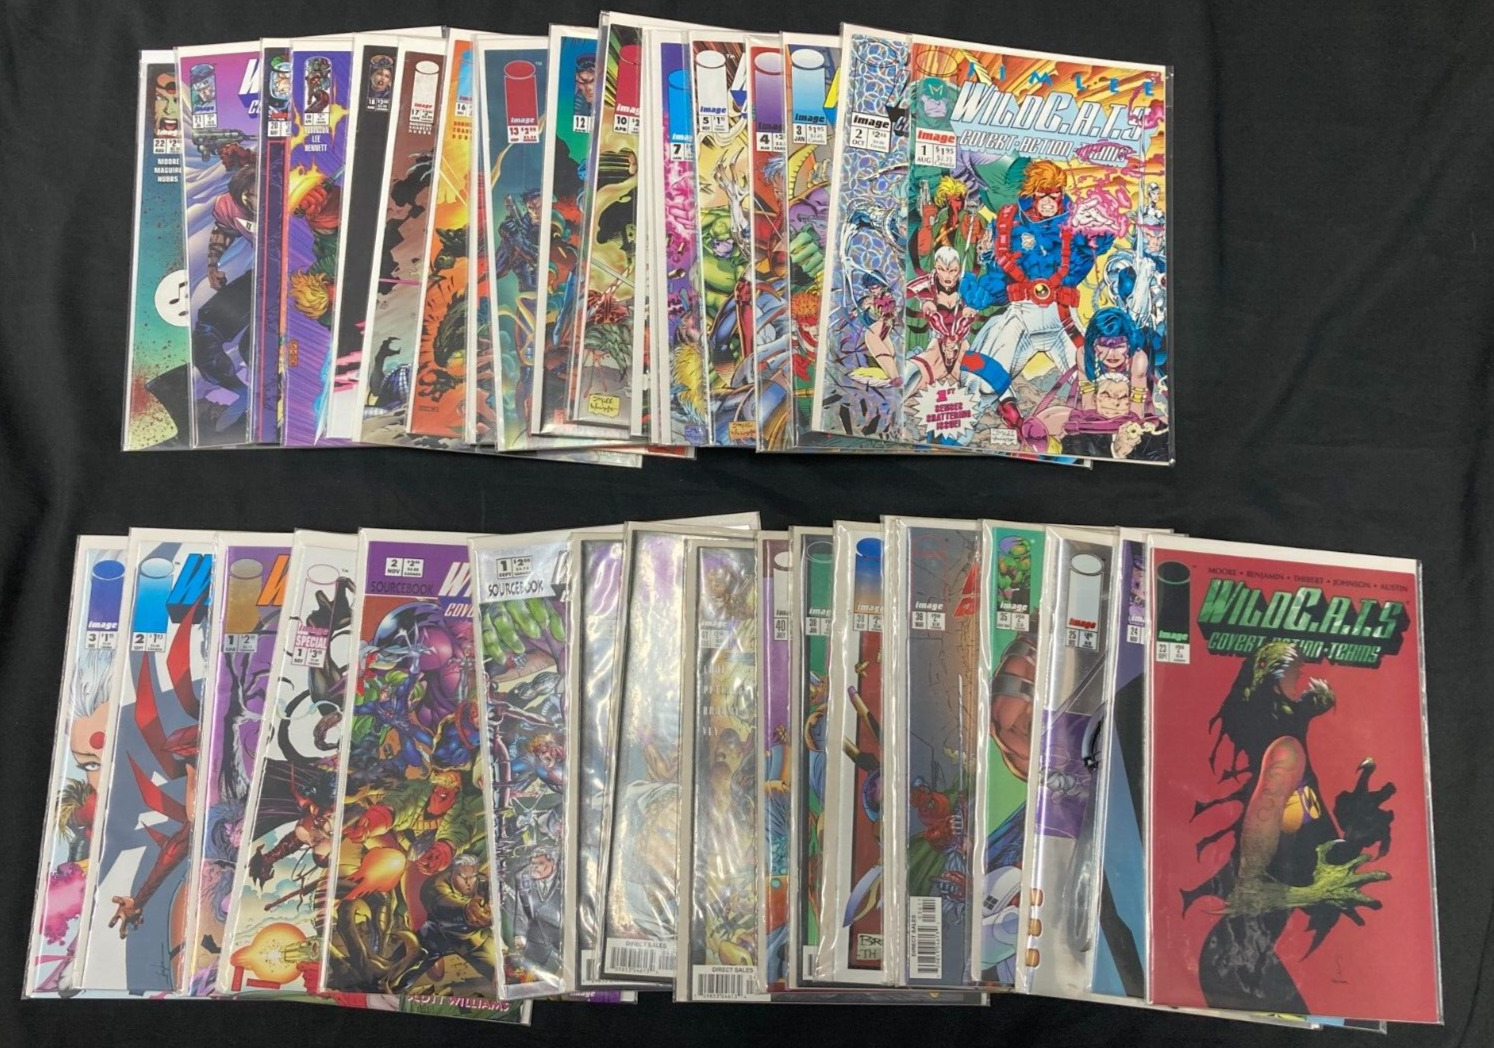 WILDC.A.T.S. COVERT • ACTION • TEAMS Image 1992 Lot Of 41 Issues